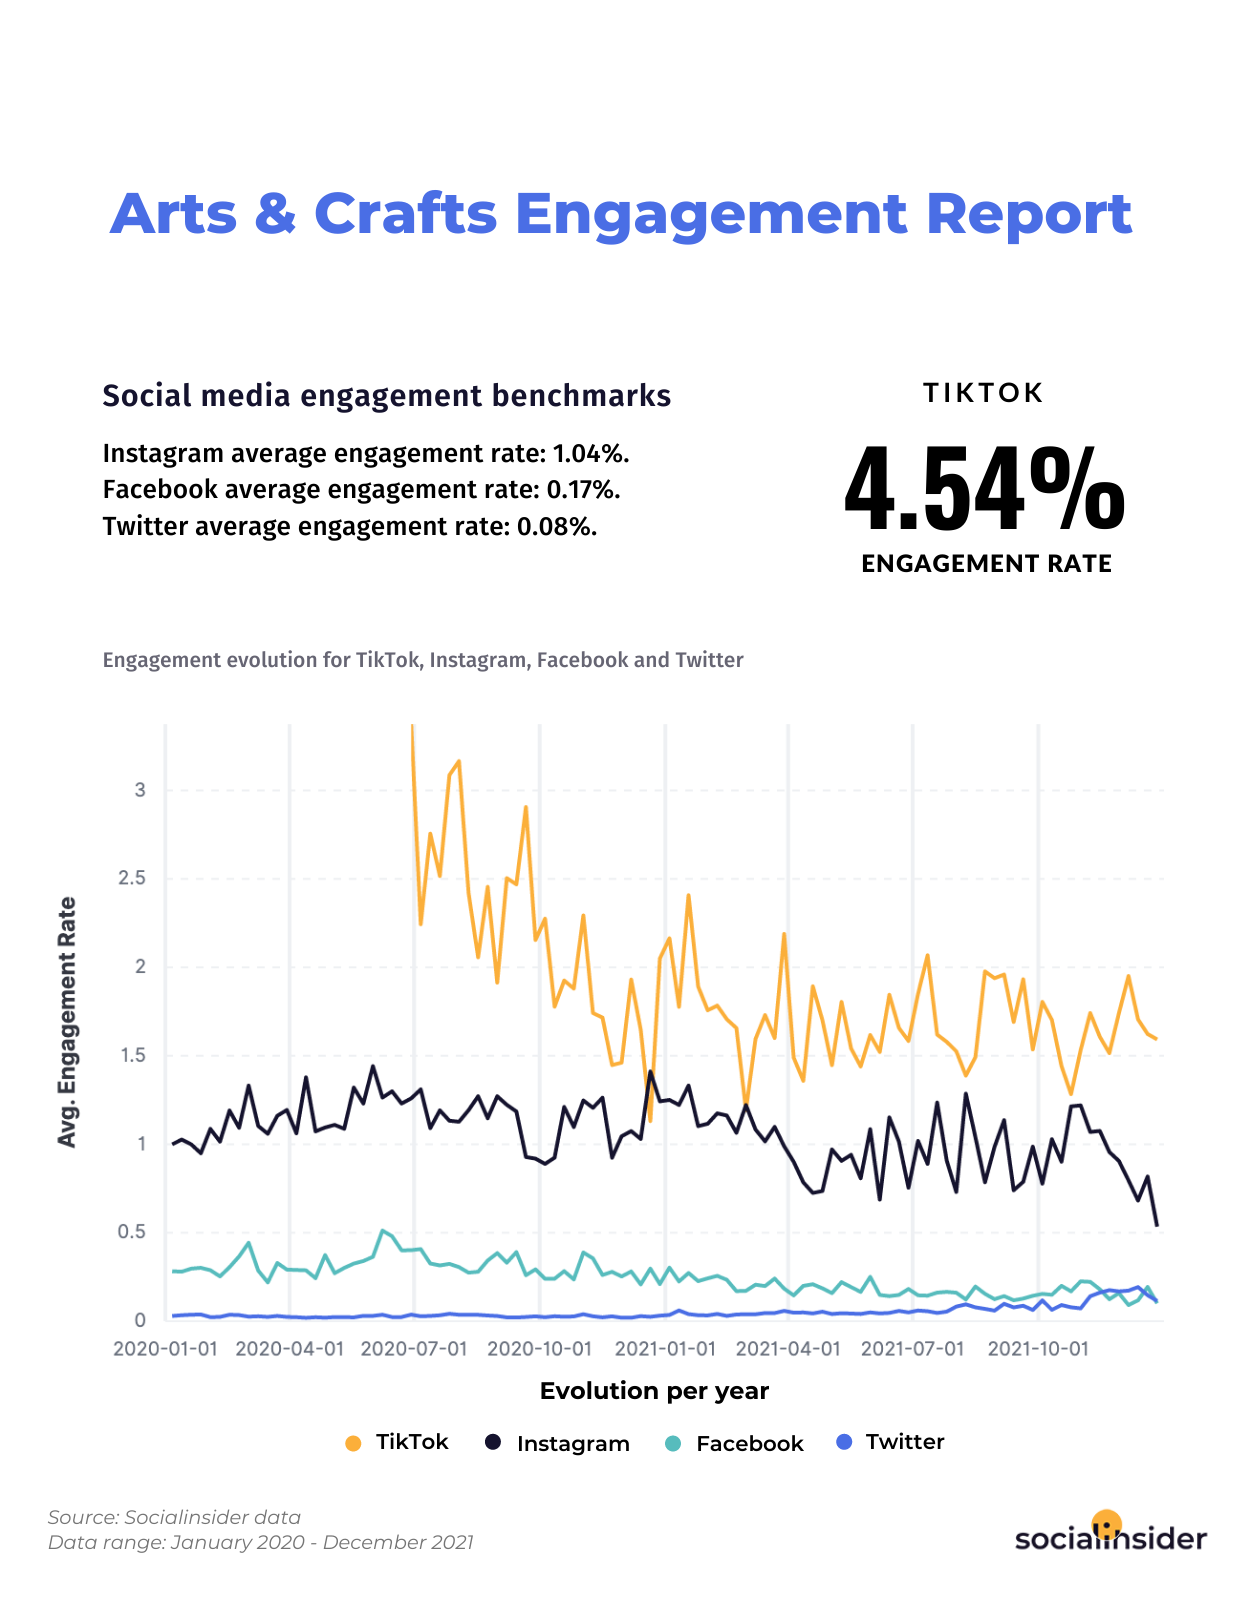 Average engagement rates for the arts & crafts industry in 2022.